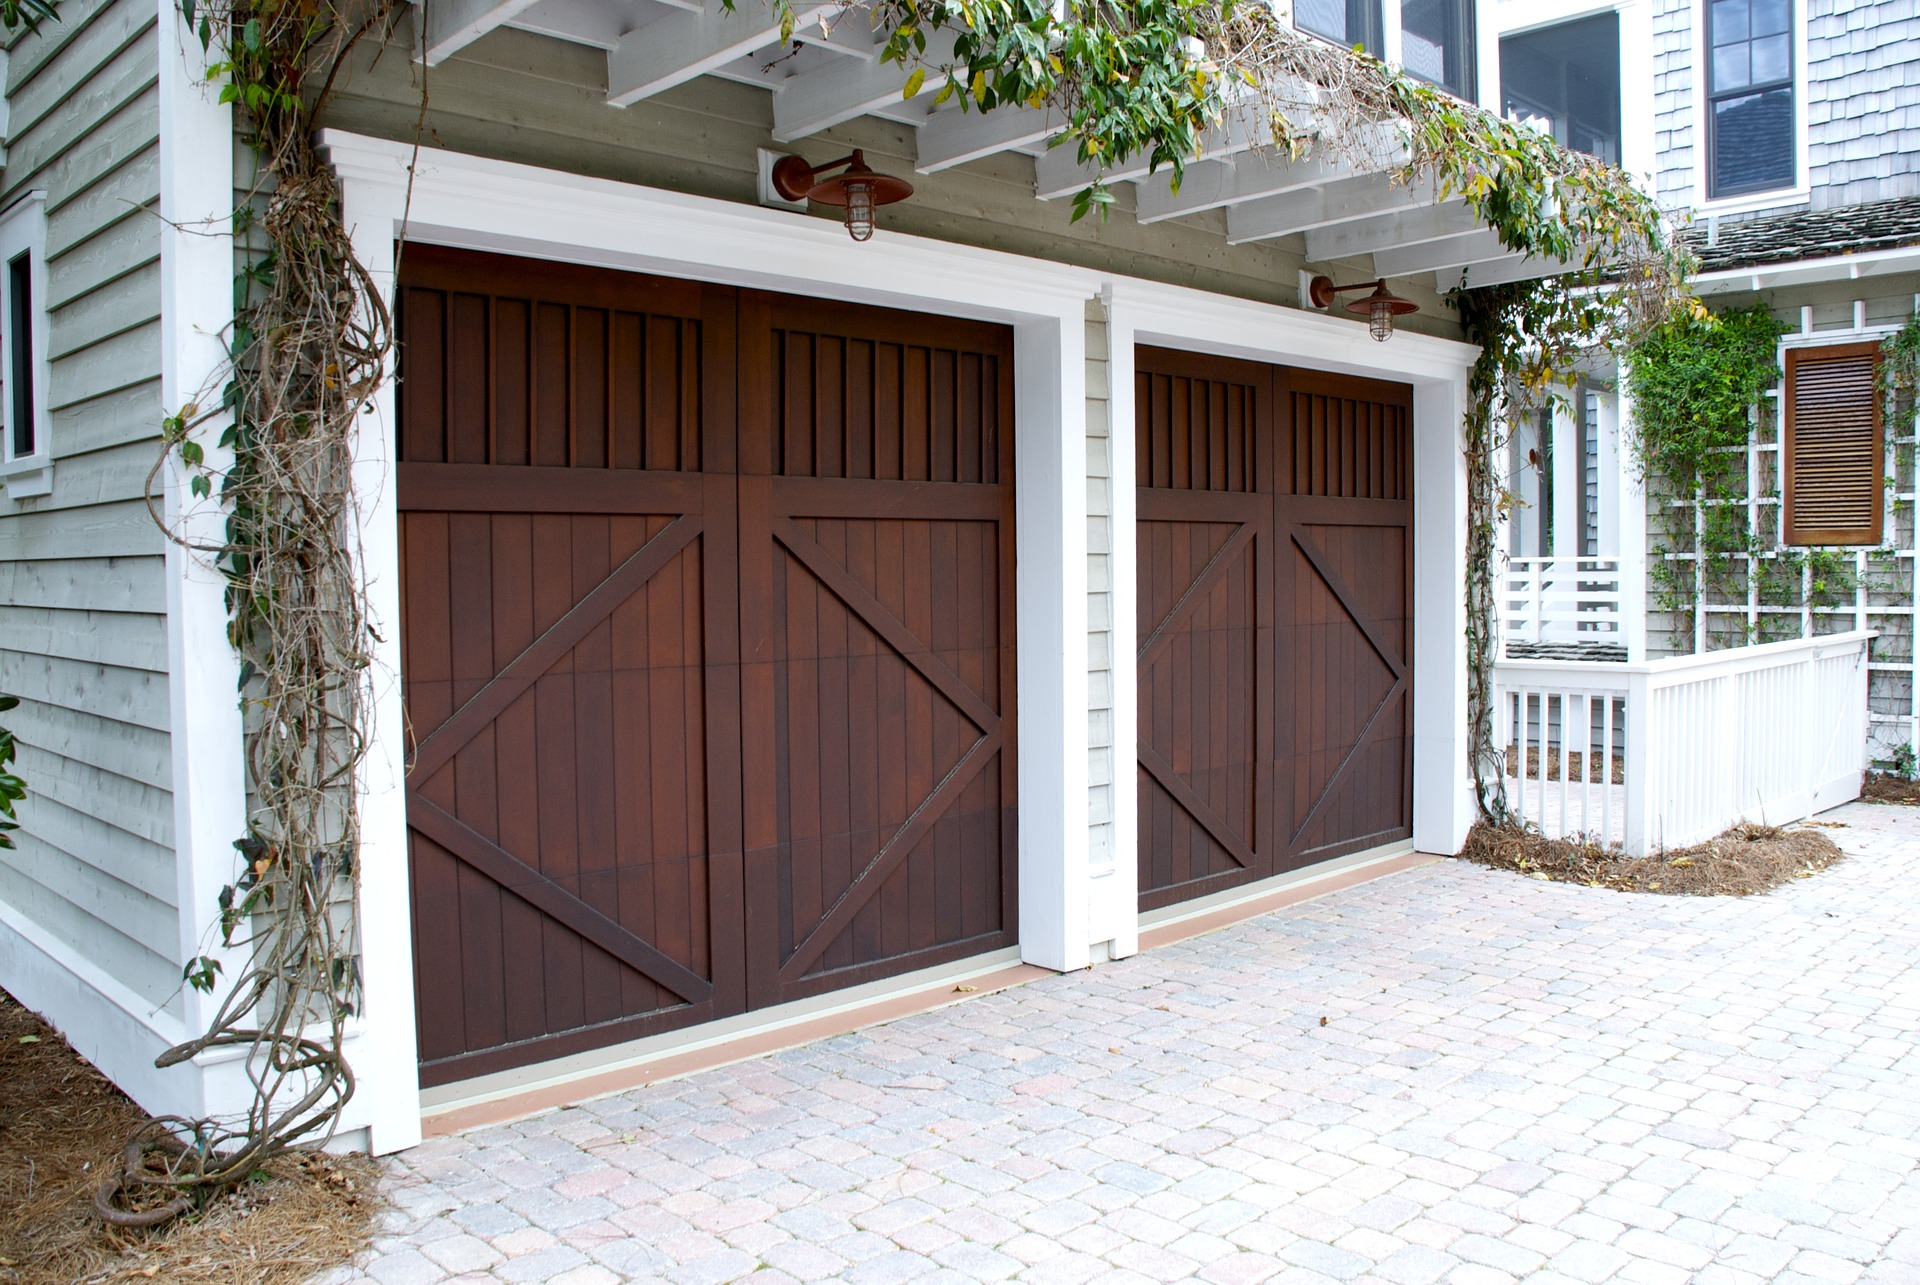 7 Detached Garage Ideas for a Large Family